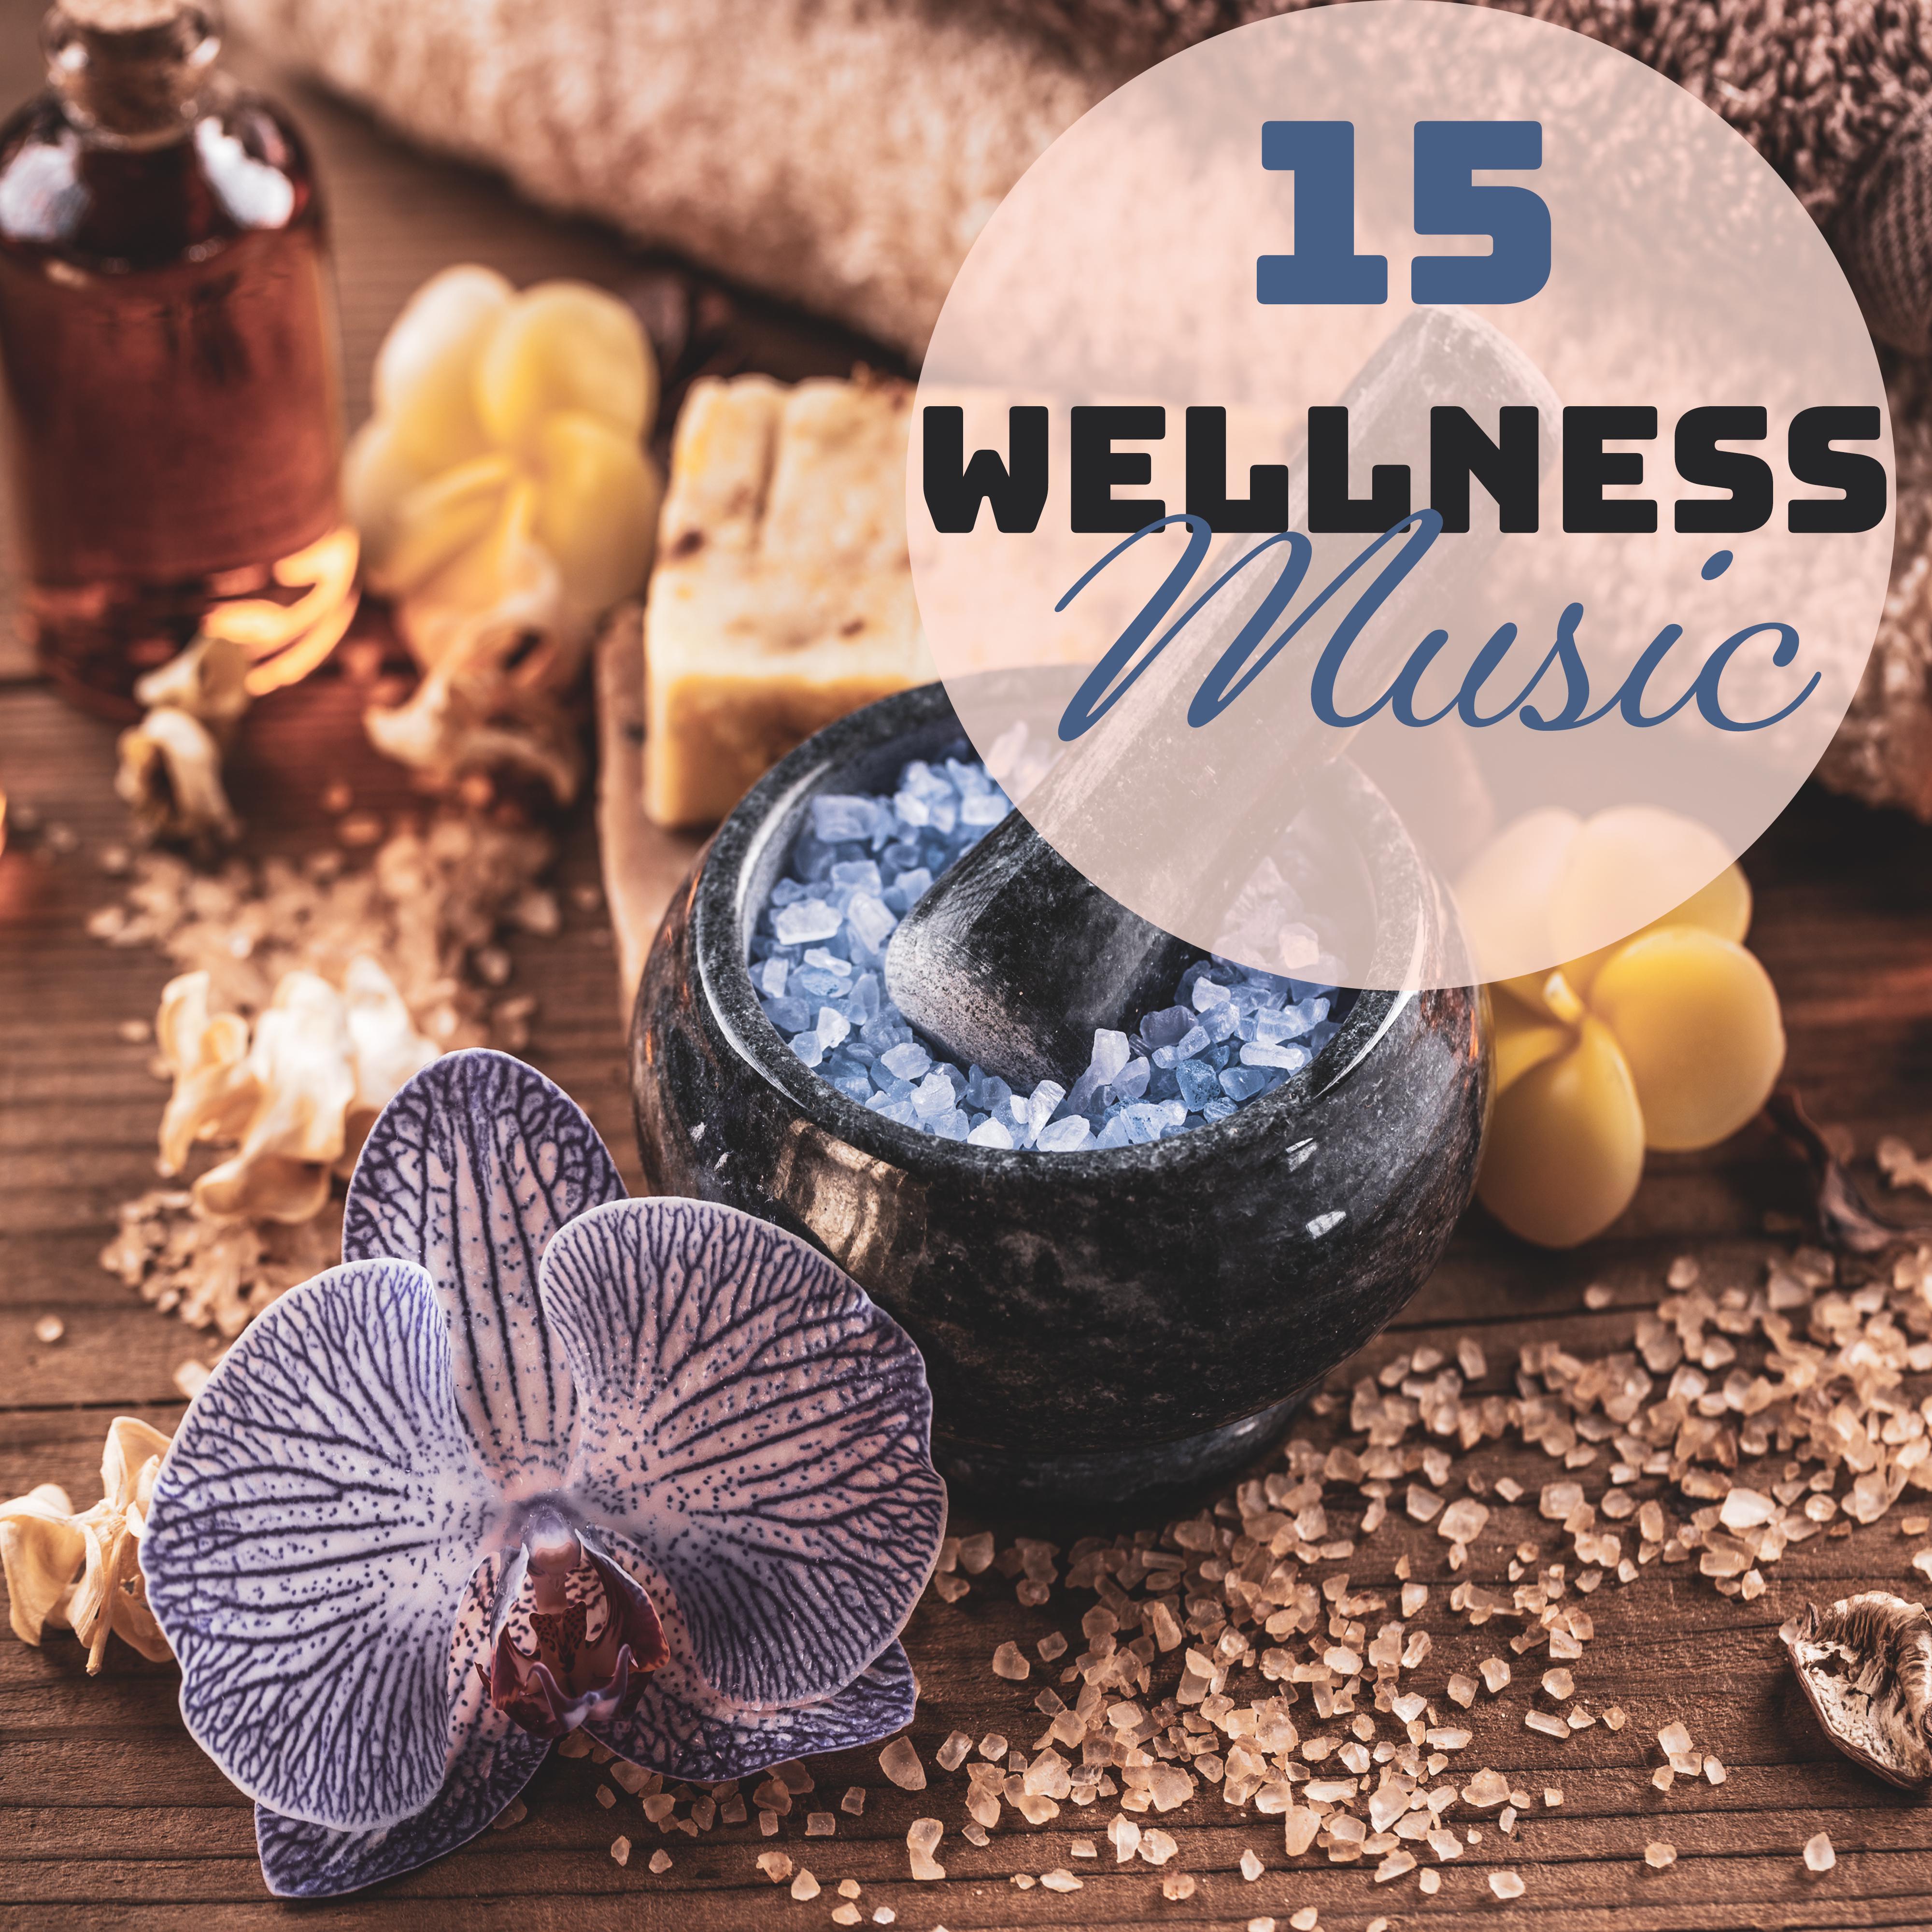 15 Wellness Music – Relaxing Music for Spa, Sleep, Massage, Stress Relief, Lounge, Zen, Spa Relaxation